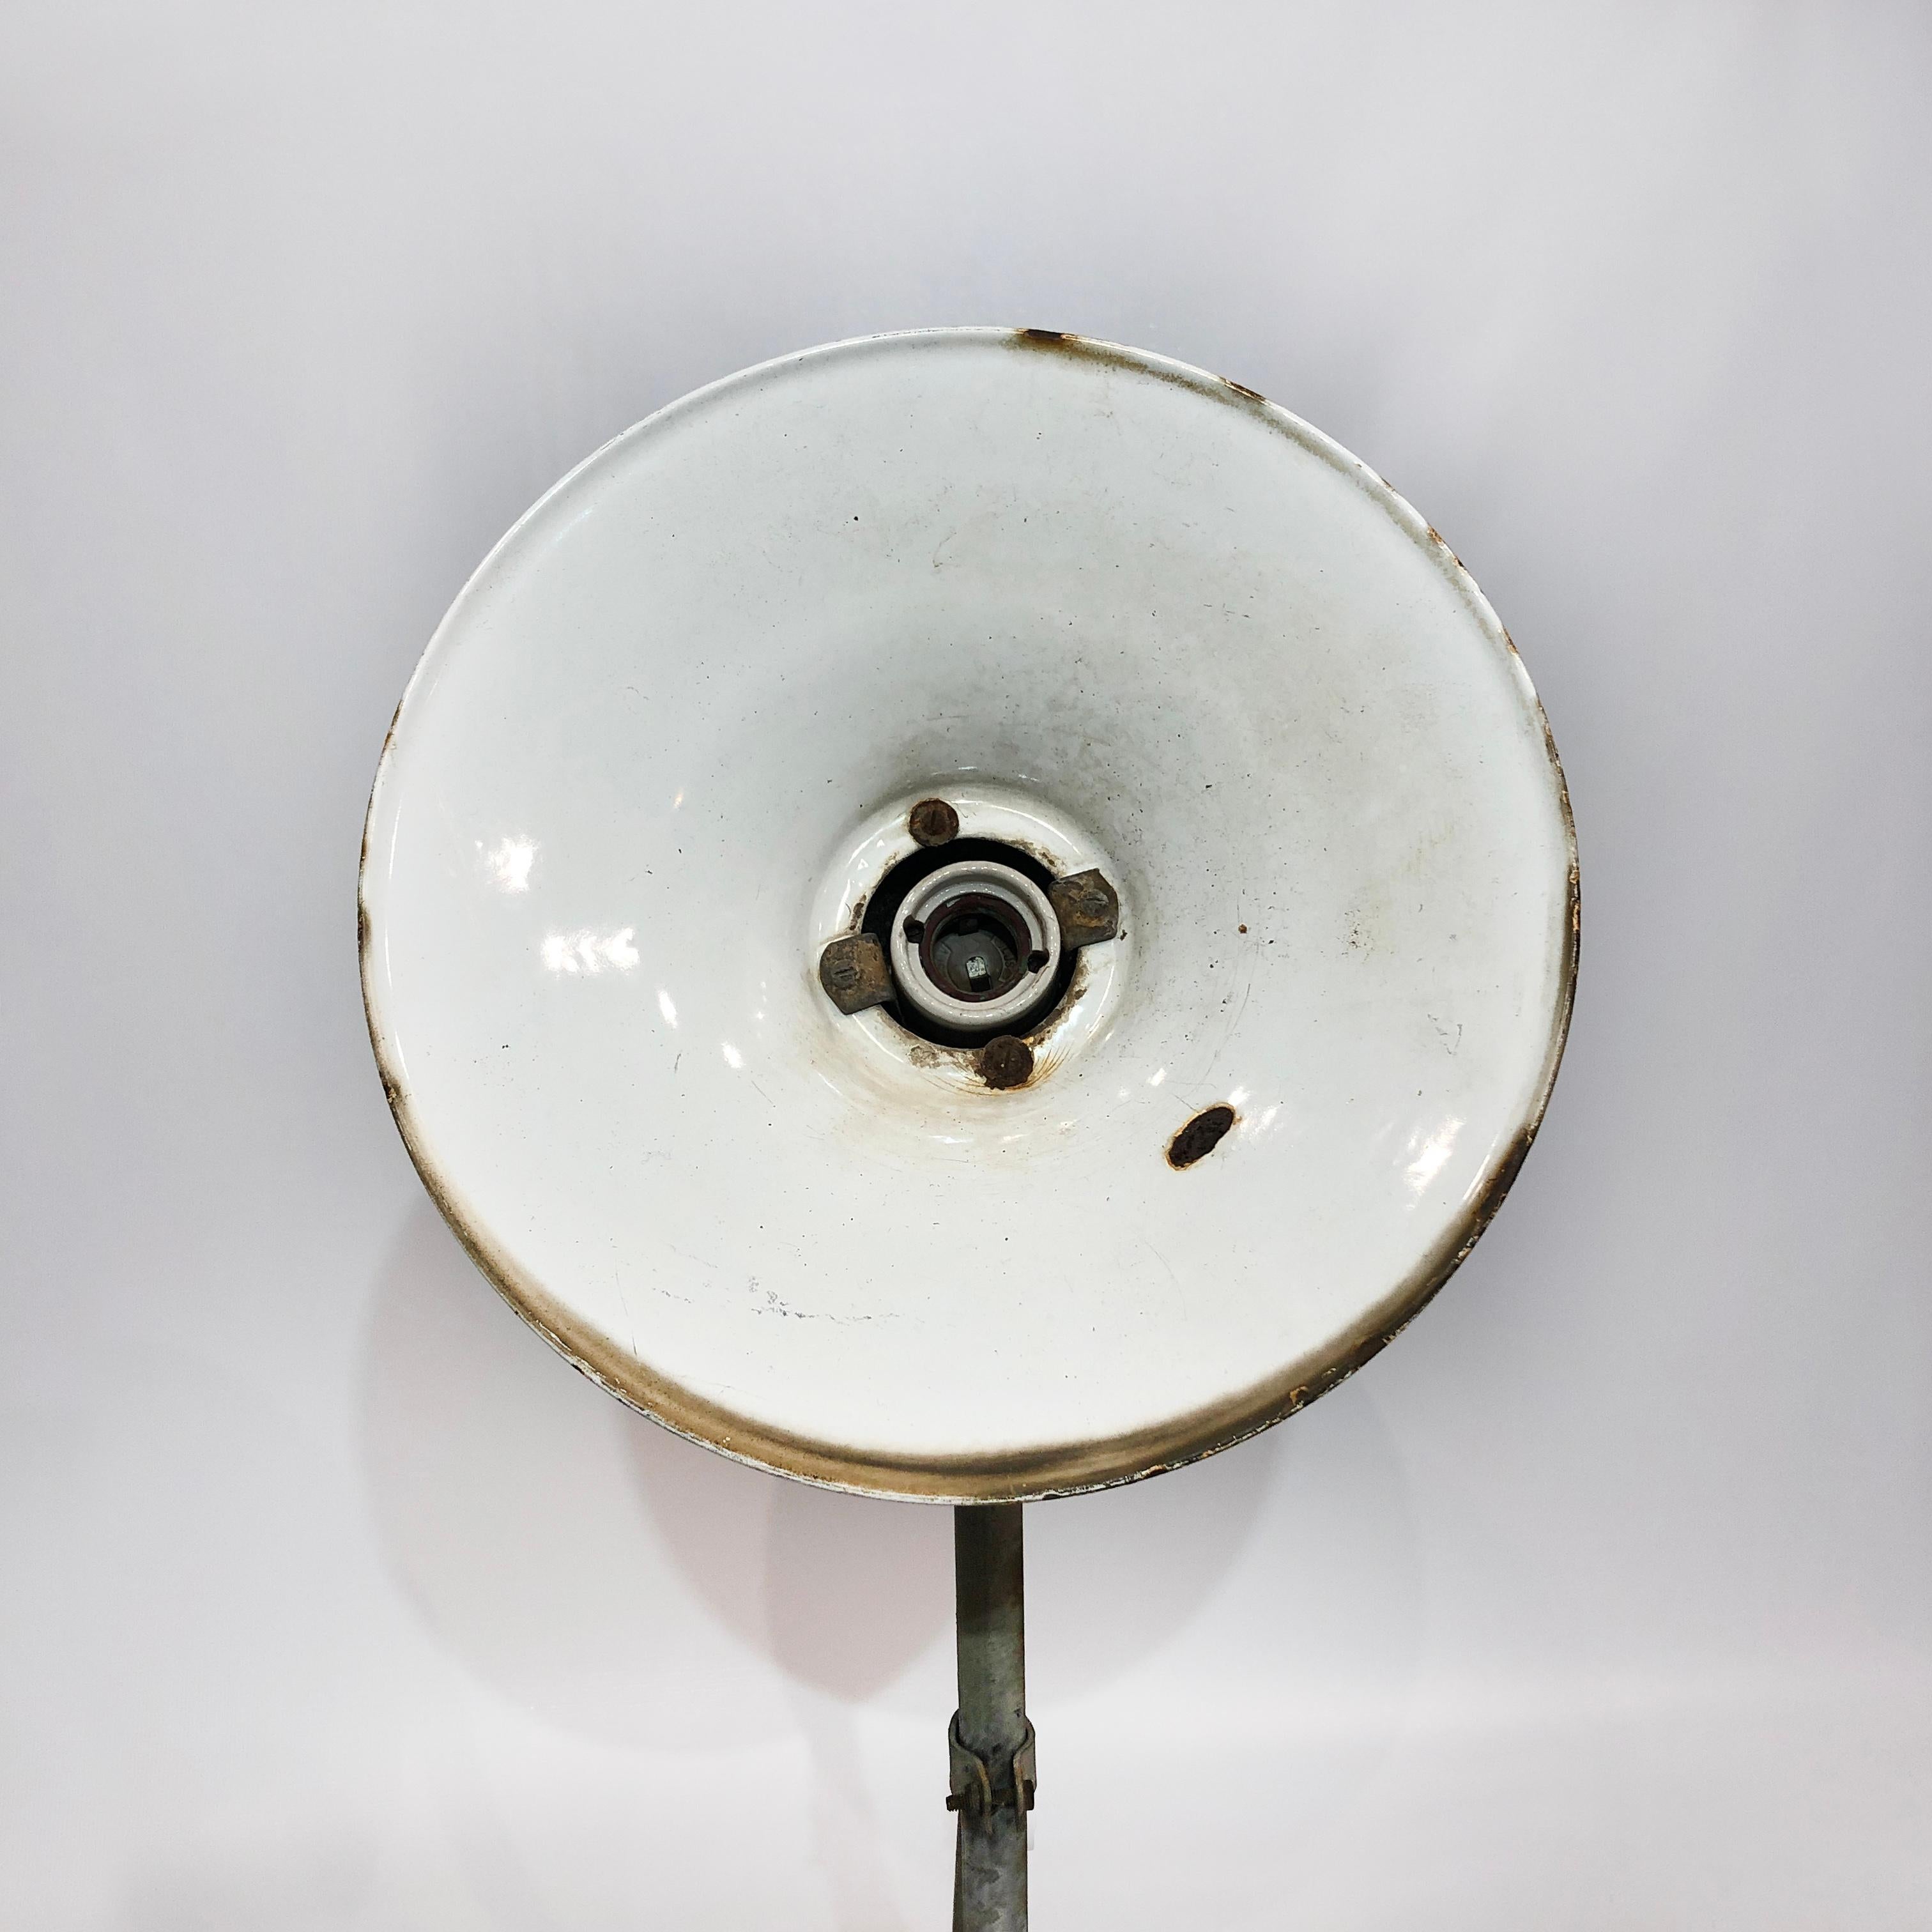 Large Industrial Wall Light 1 of 3 1950s Vintage Retro Commercial Lighting Lamp 4